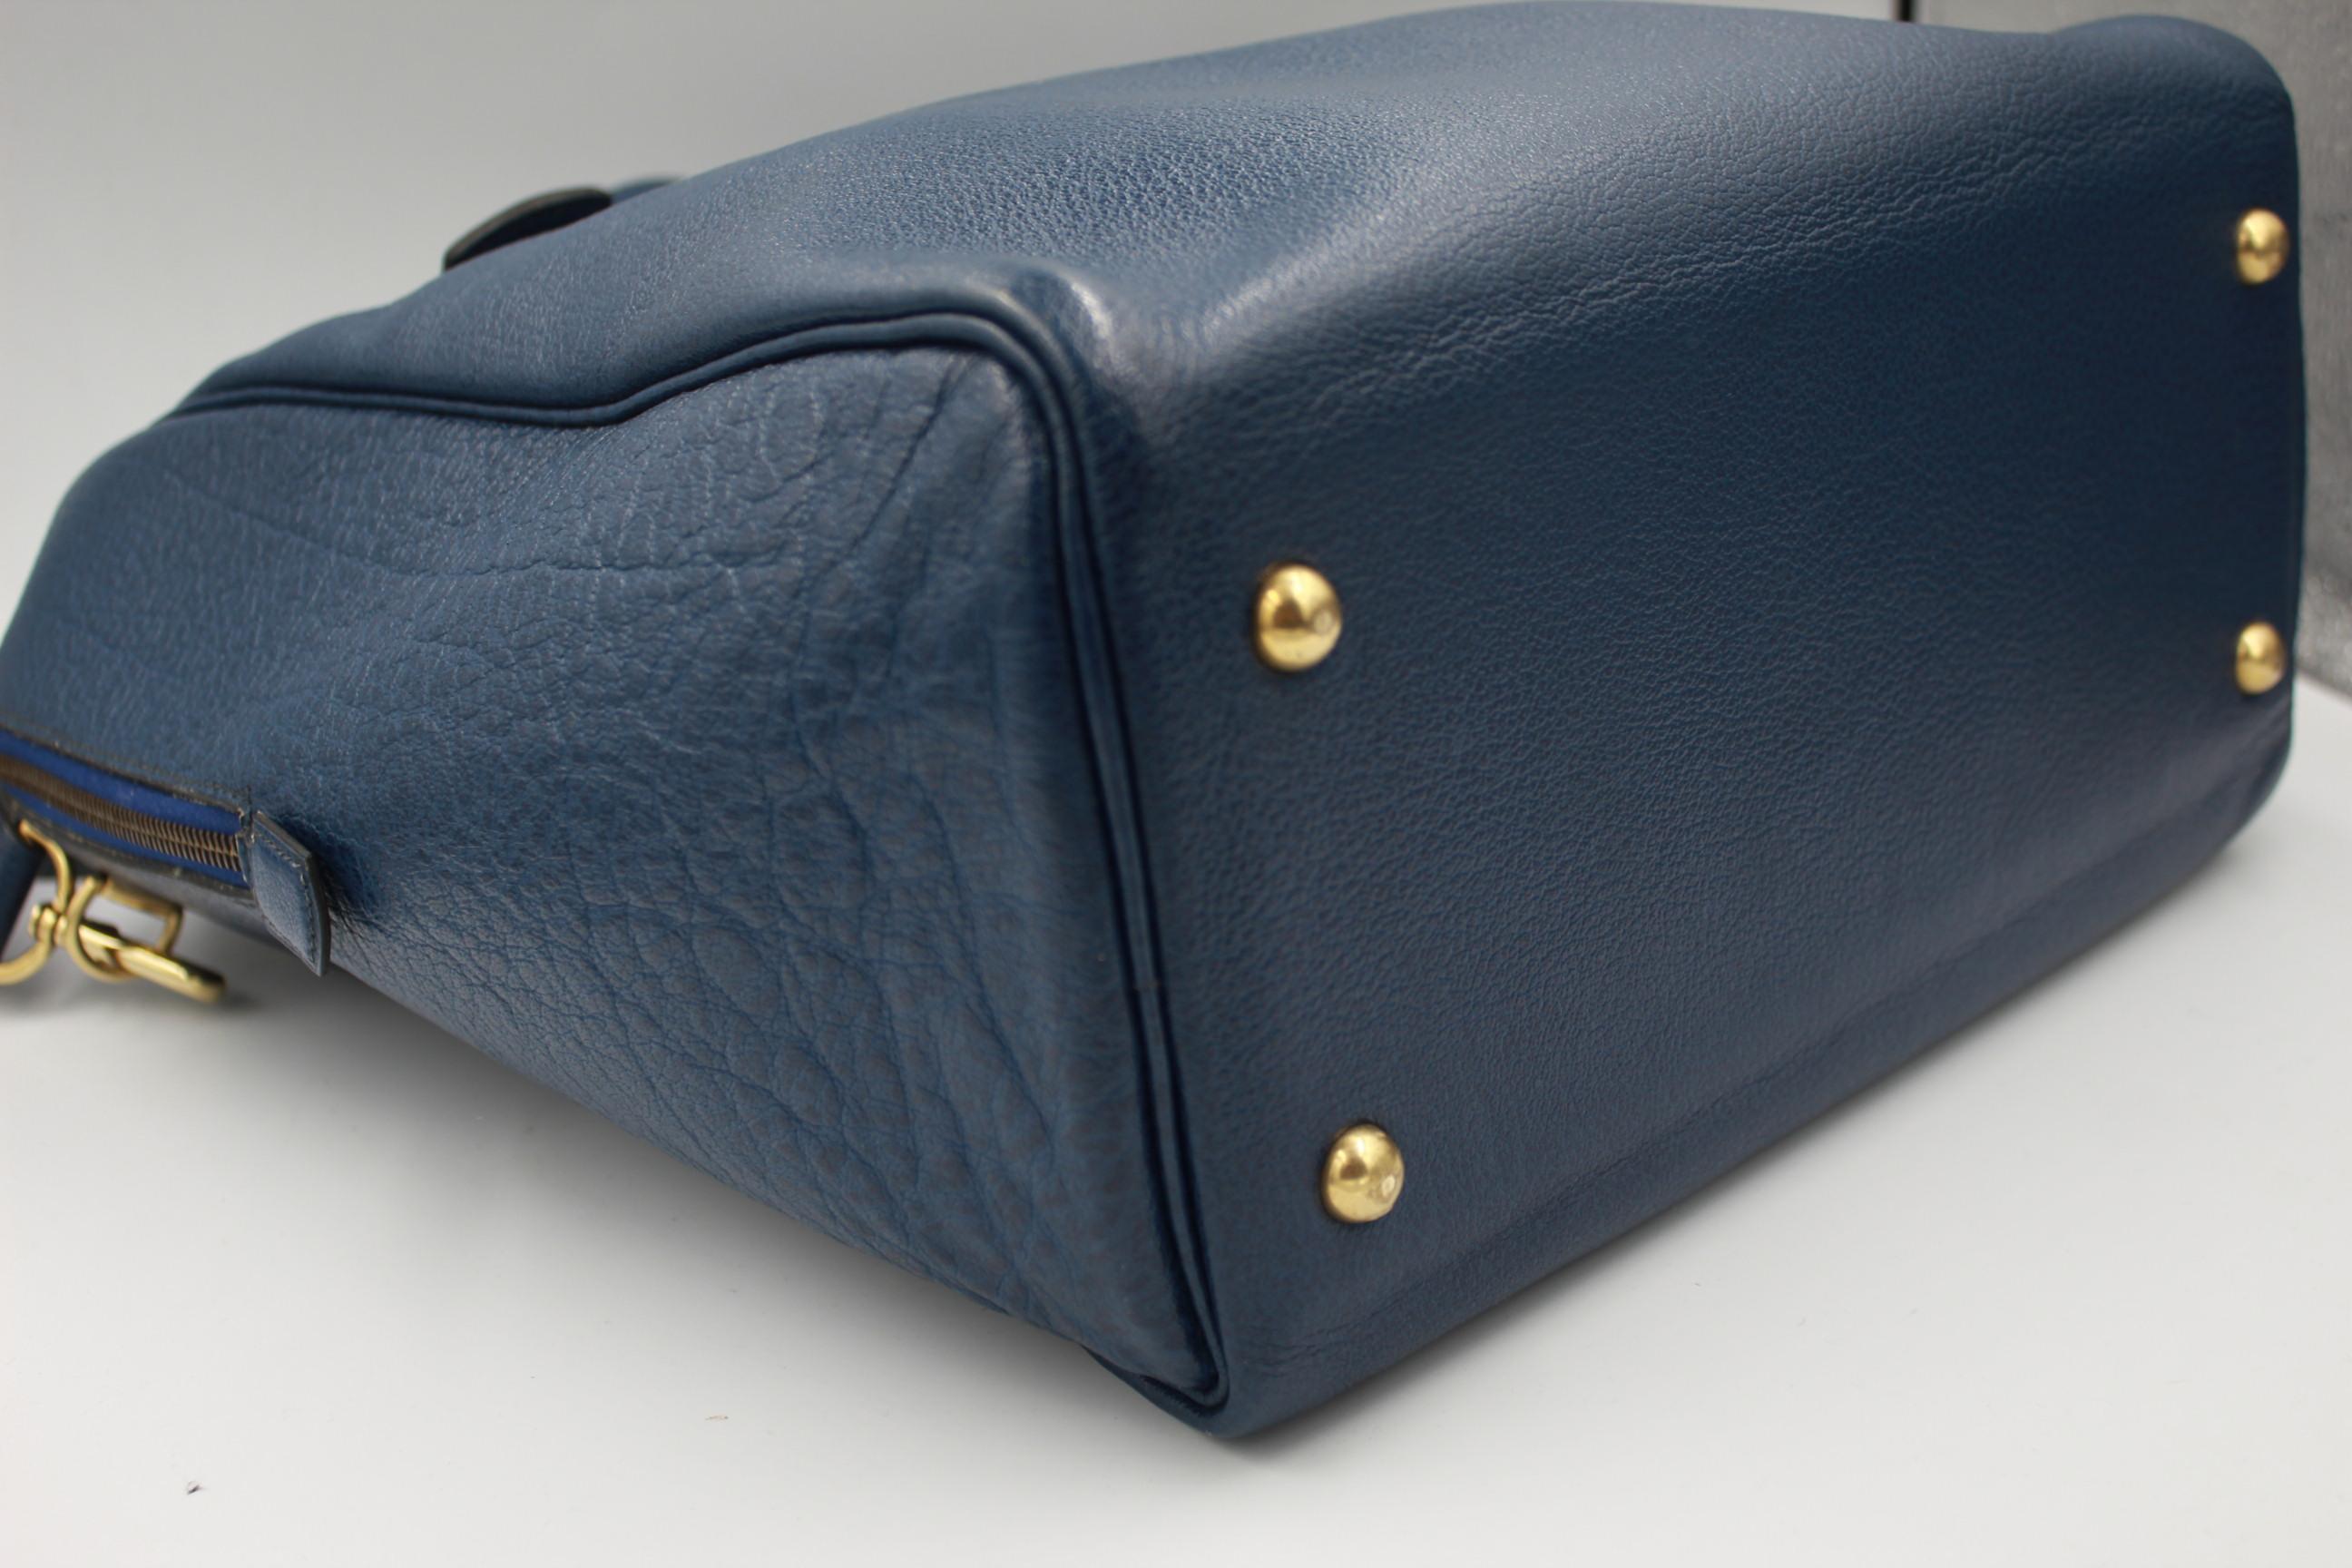 Hermes men handbag in blue leather
Good conditions.
Can be wear close body.
34cm x 28cm x 14cm